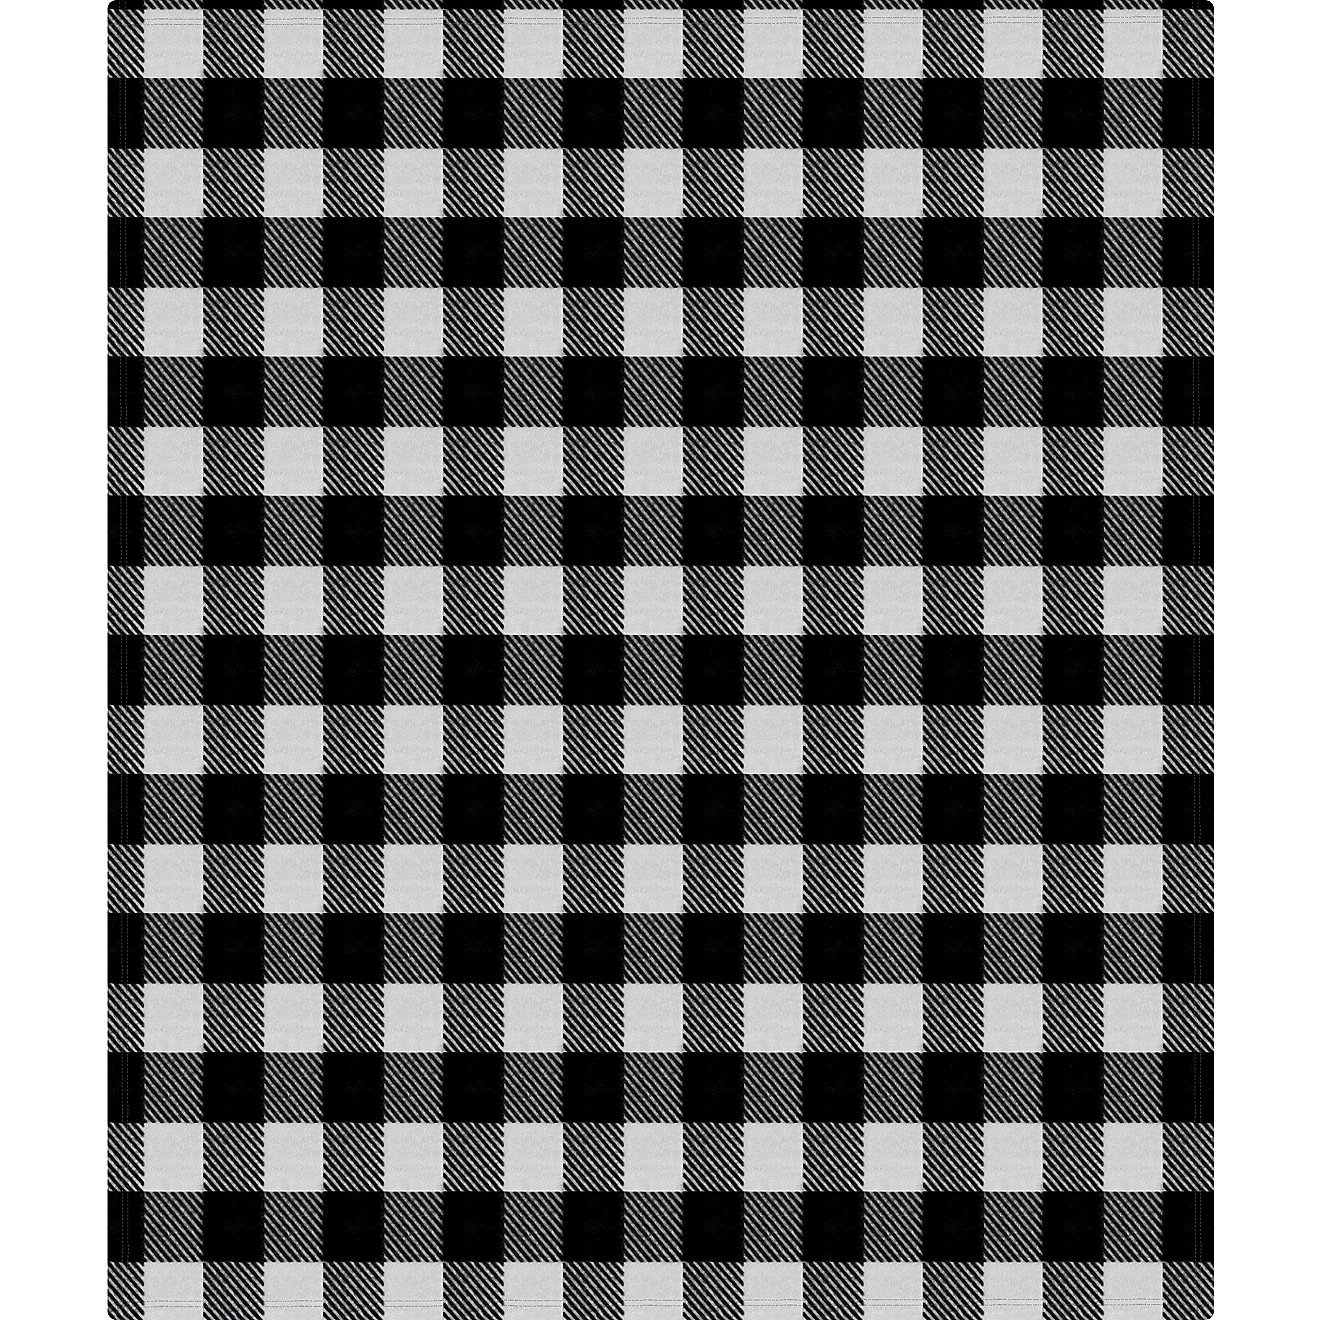 Snowcap 50 in x 60 in Black/White Fleece Buffalo Check Throw Blanket                                                             - view number 1